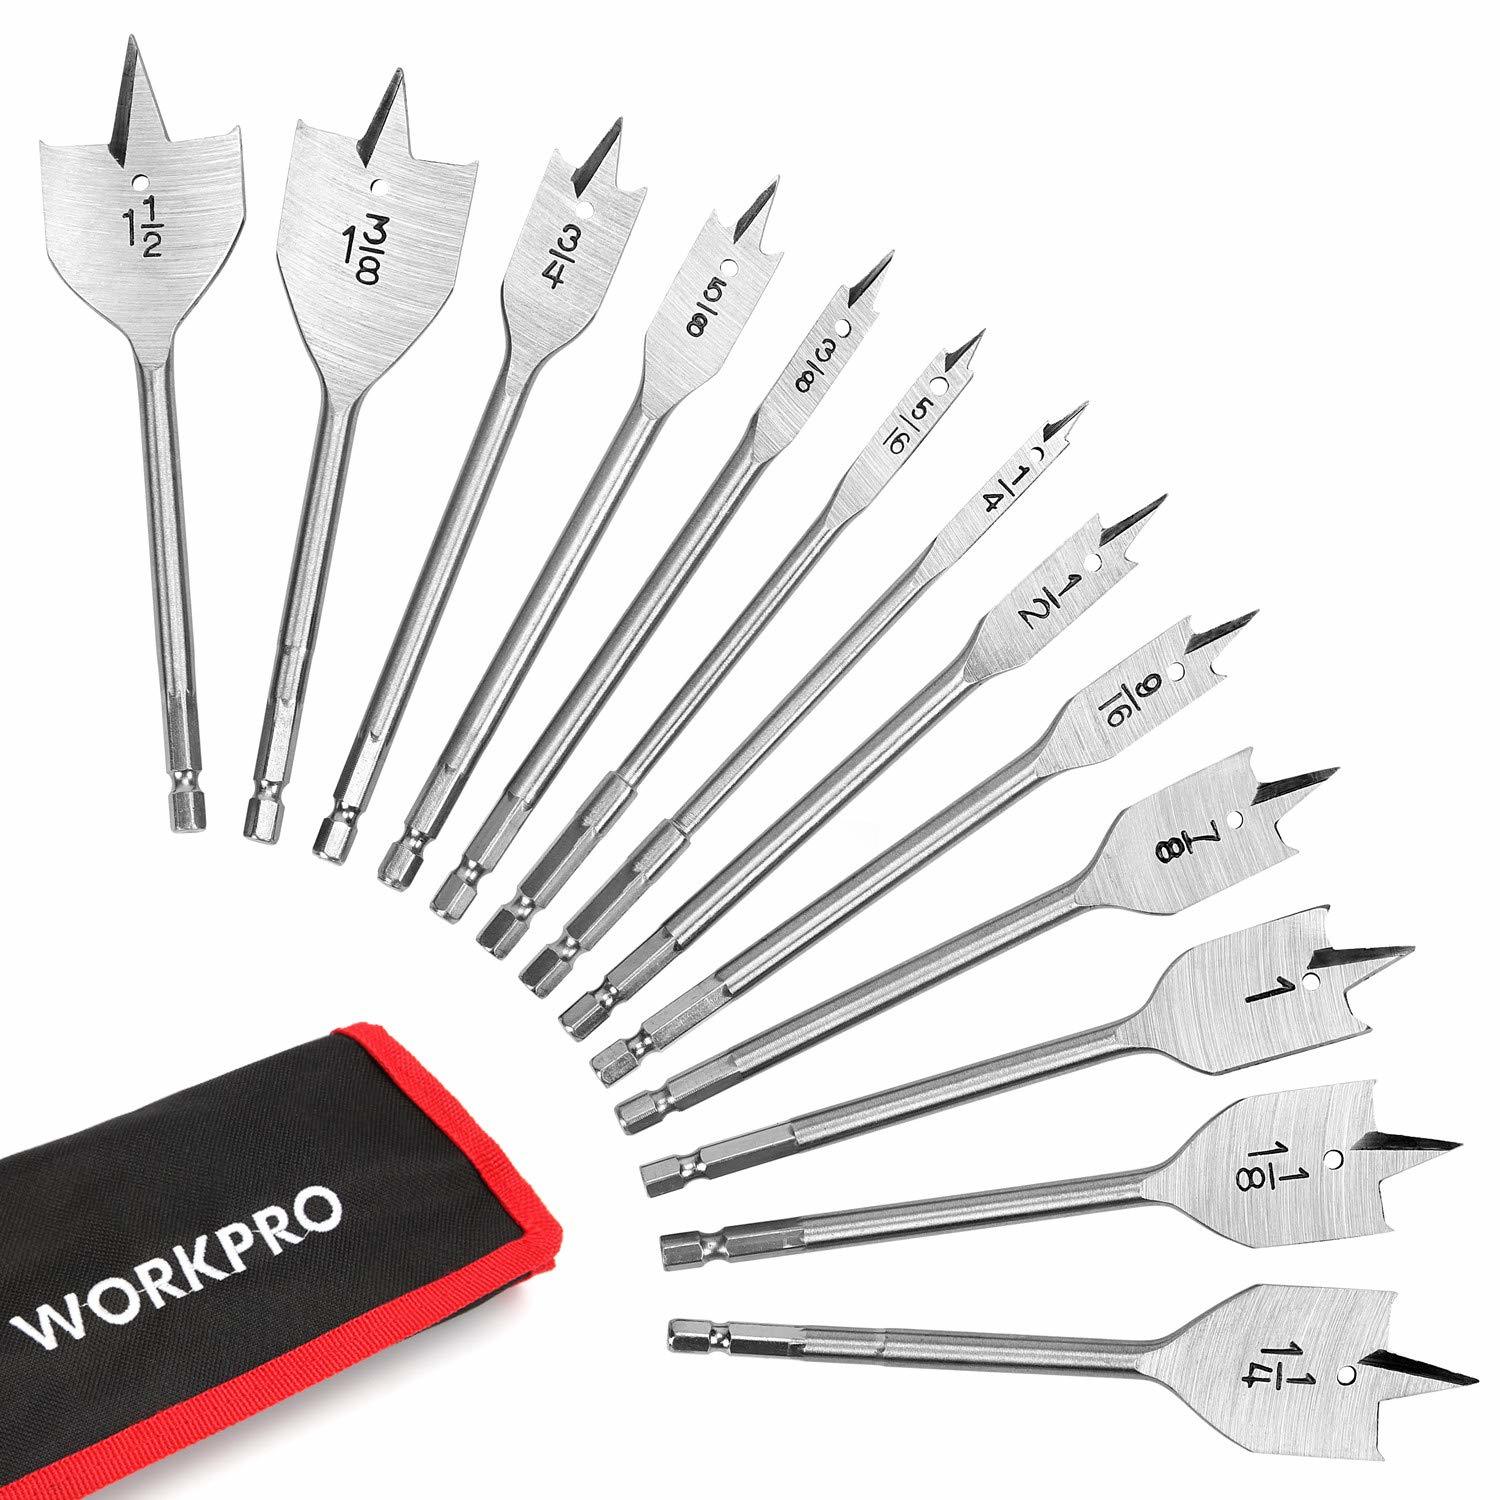 Primary image for WORKPRO 13-Piece Spade Drill Bit Set in SAE, Paddle Flat Bits for Woodworking, N